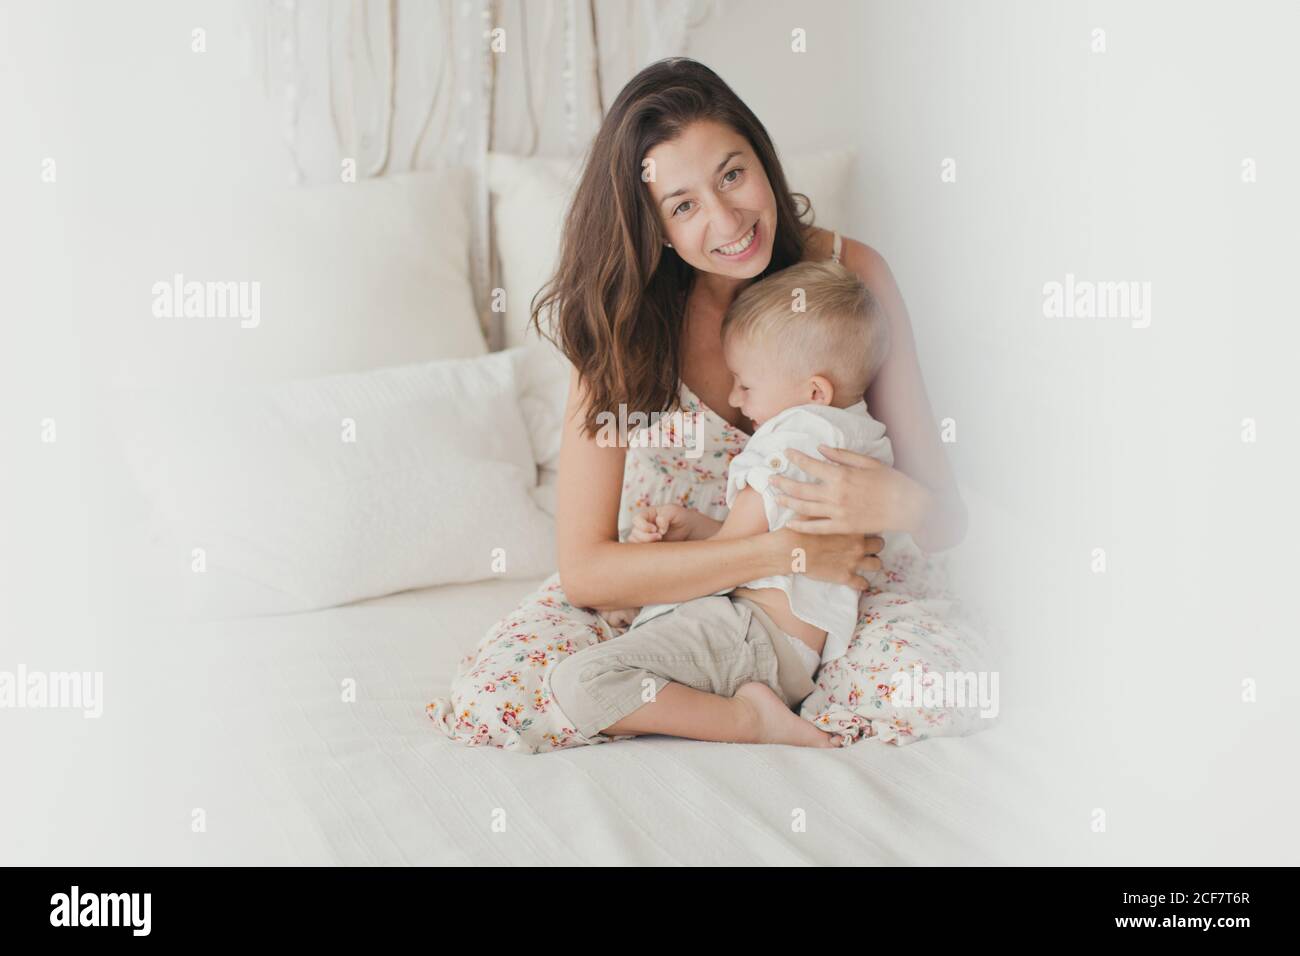 Satisfied brunette in white gown having fun with happy male toddler while embracing on bed Stock Photo